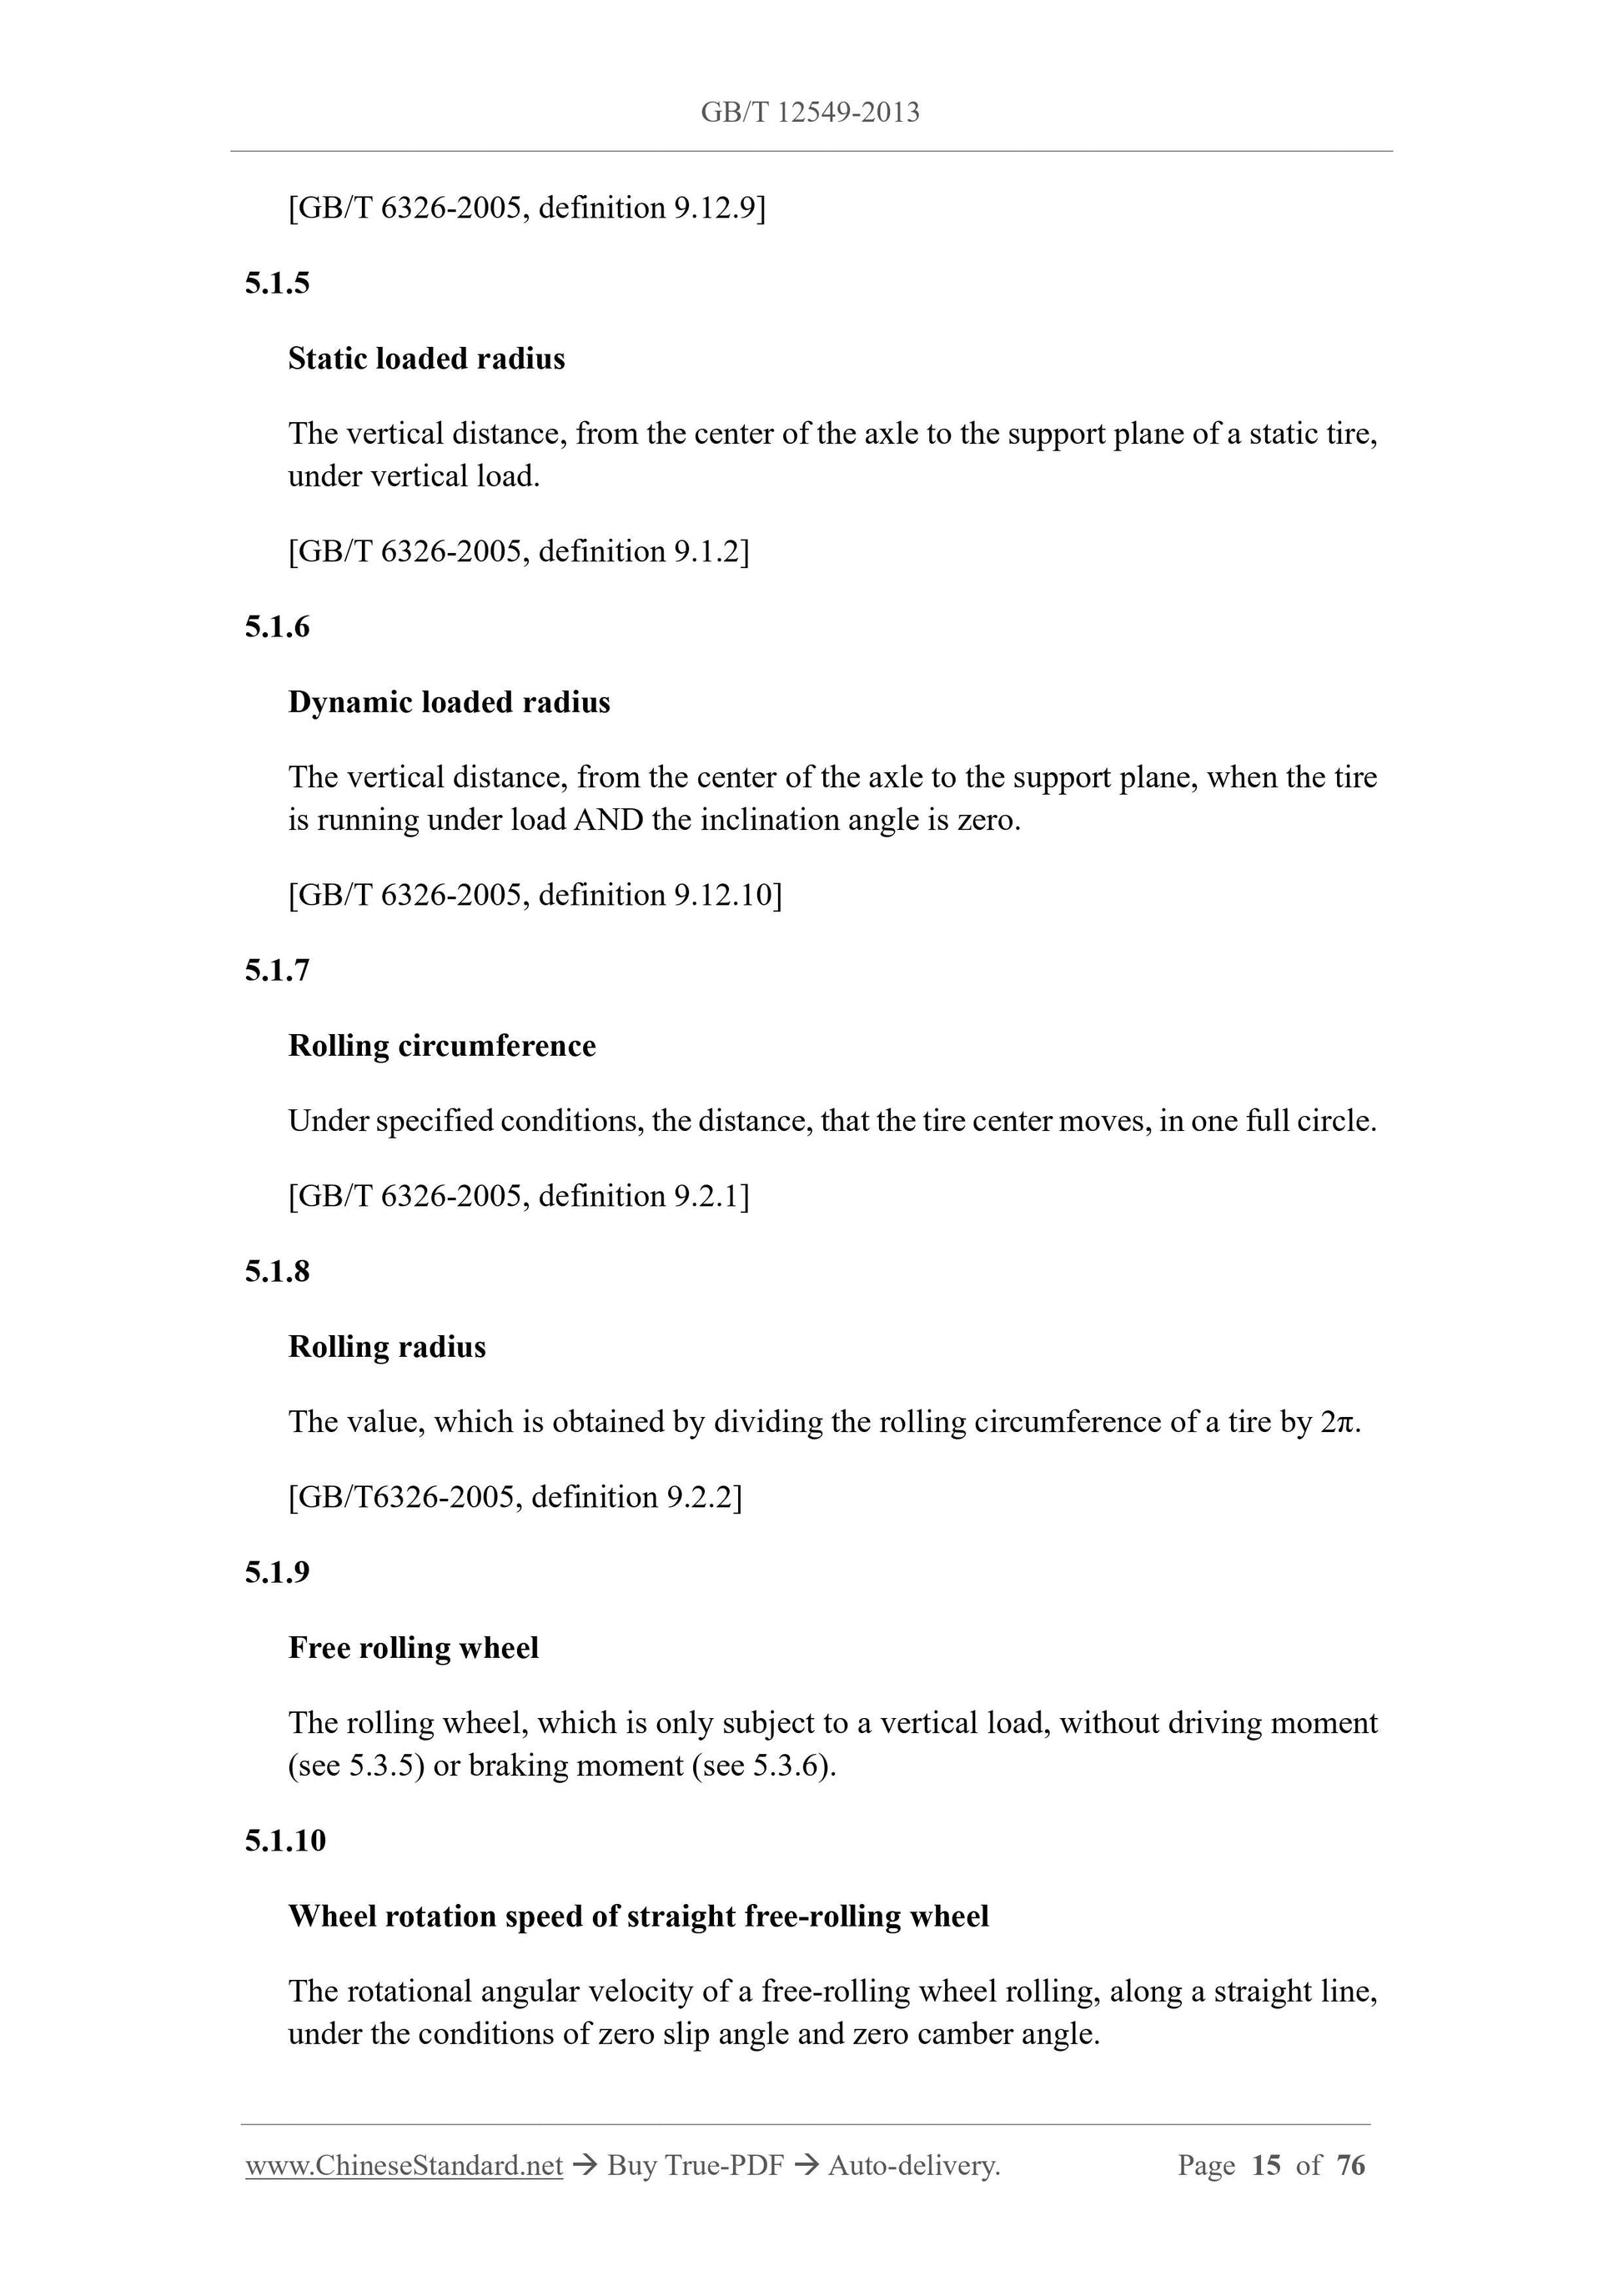 GB/T 12549-2013 Page 9